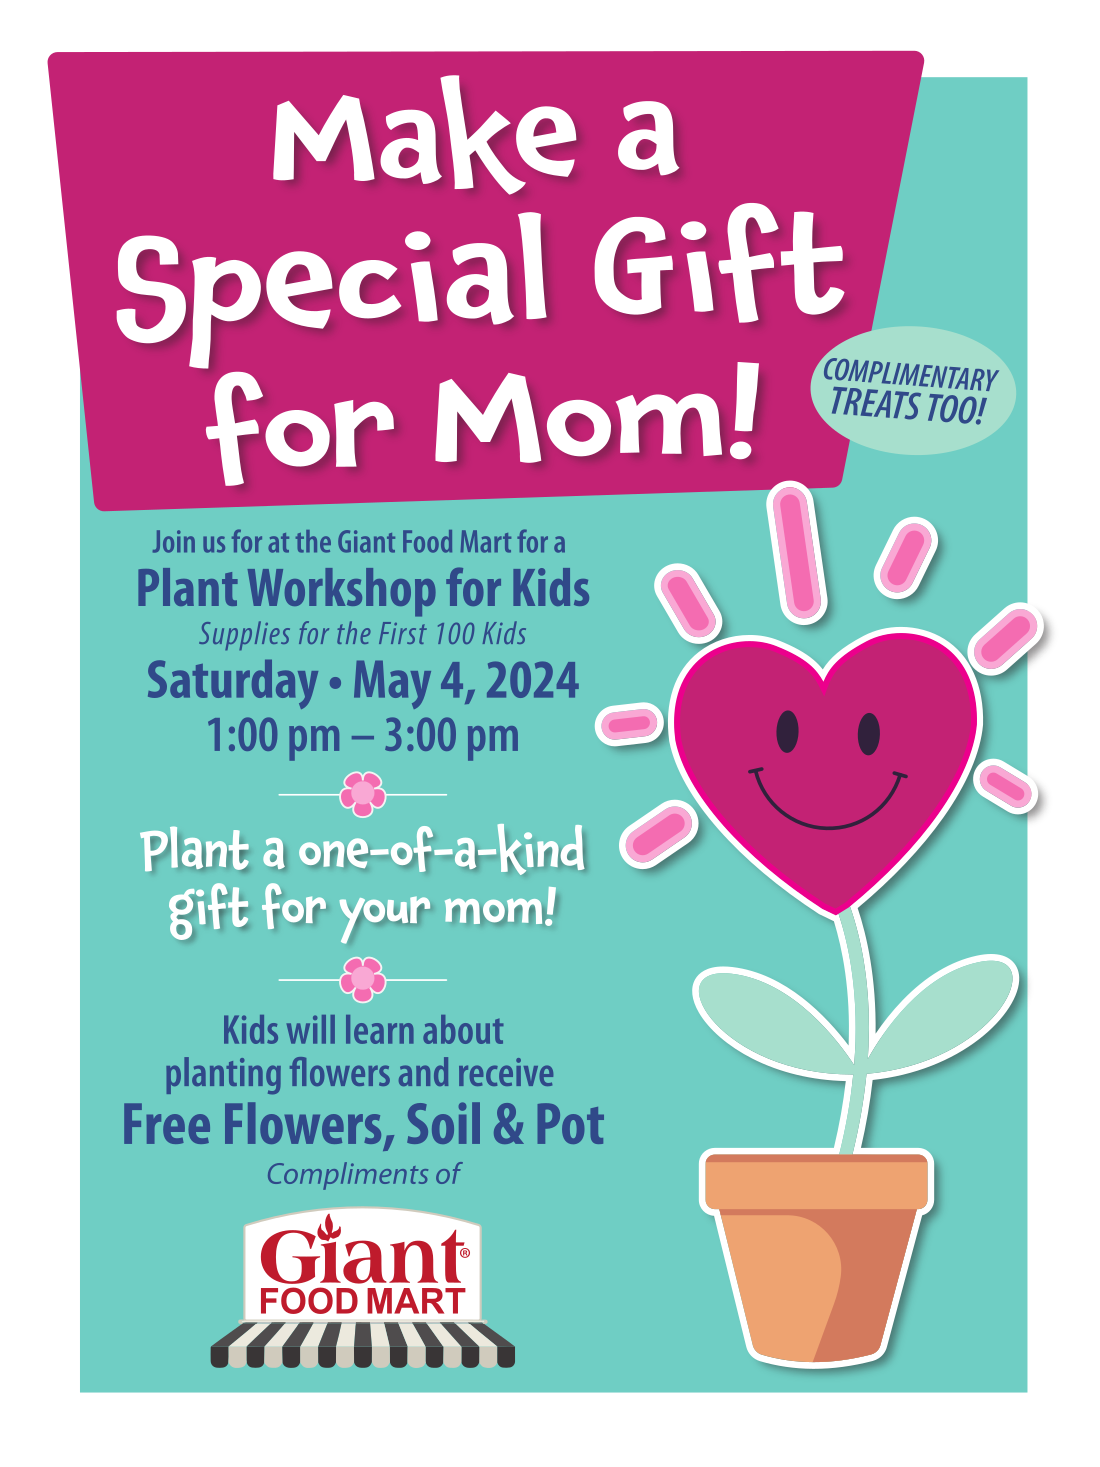 Make a special gift for mom!